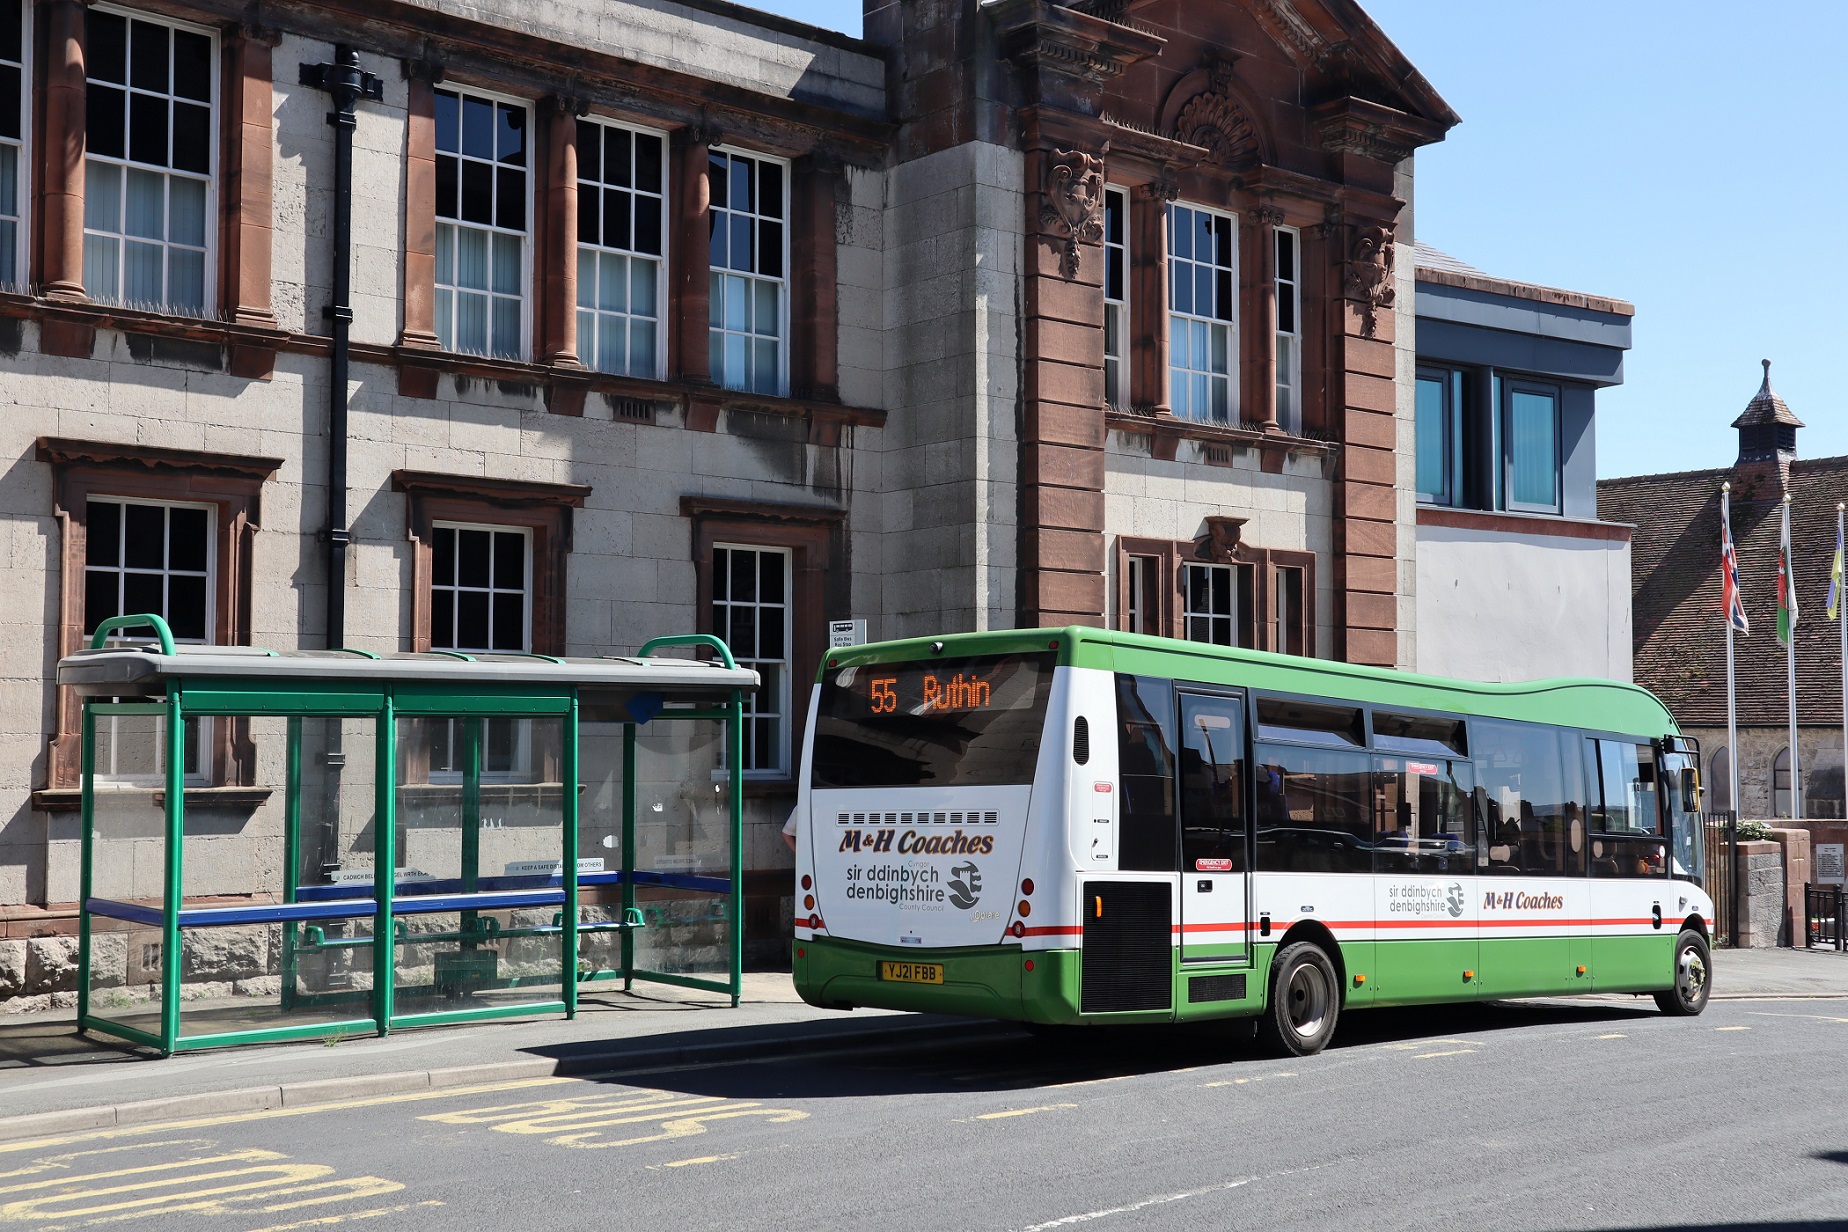 Wales bus patronage could explode with investment, says report